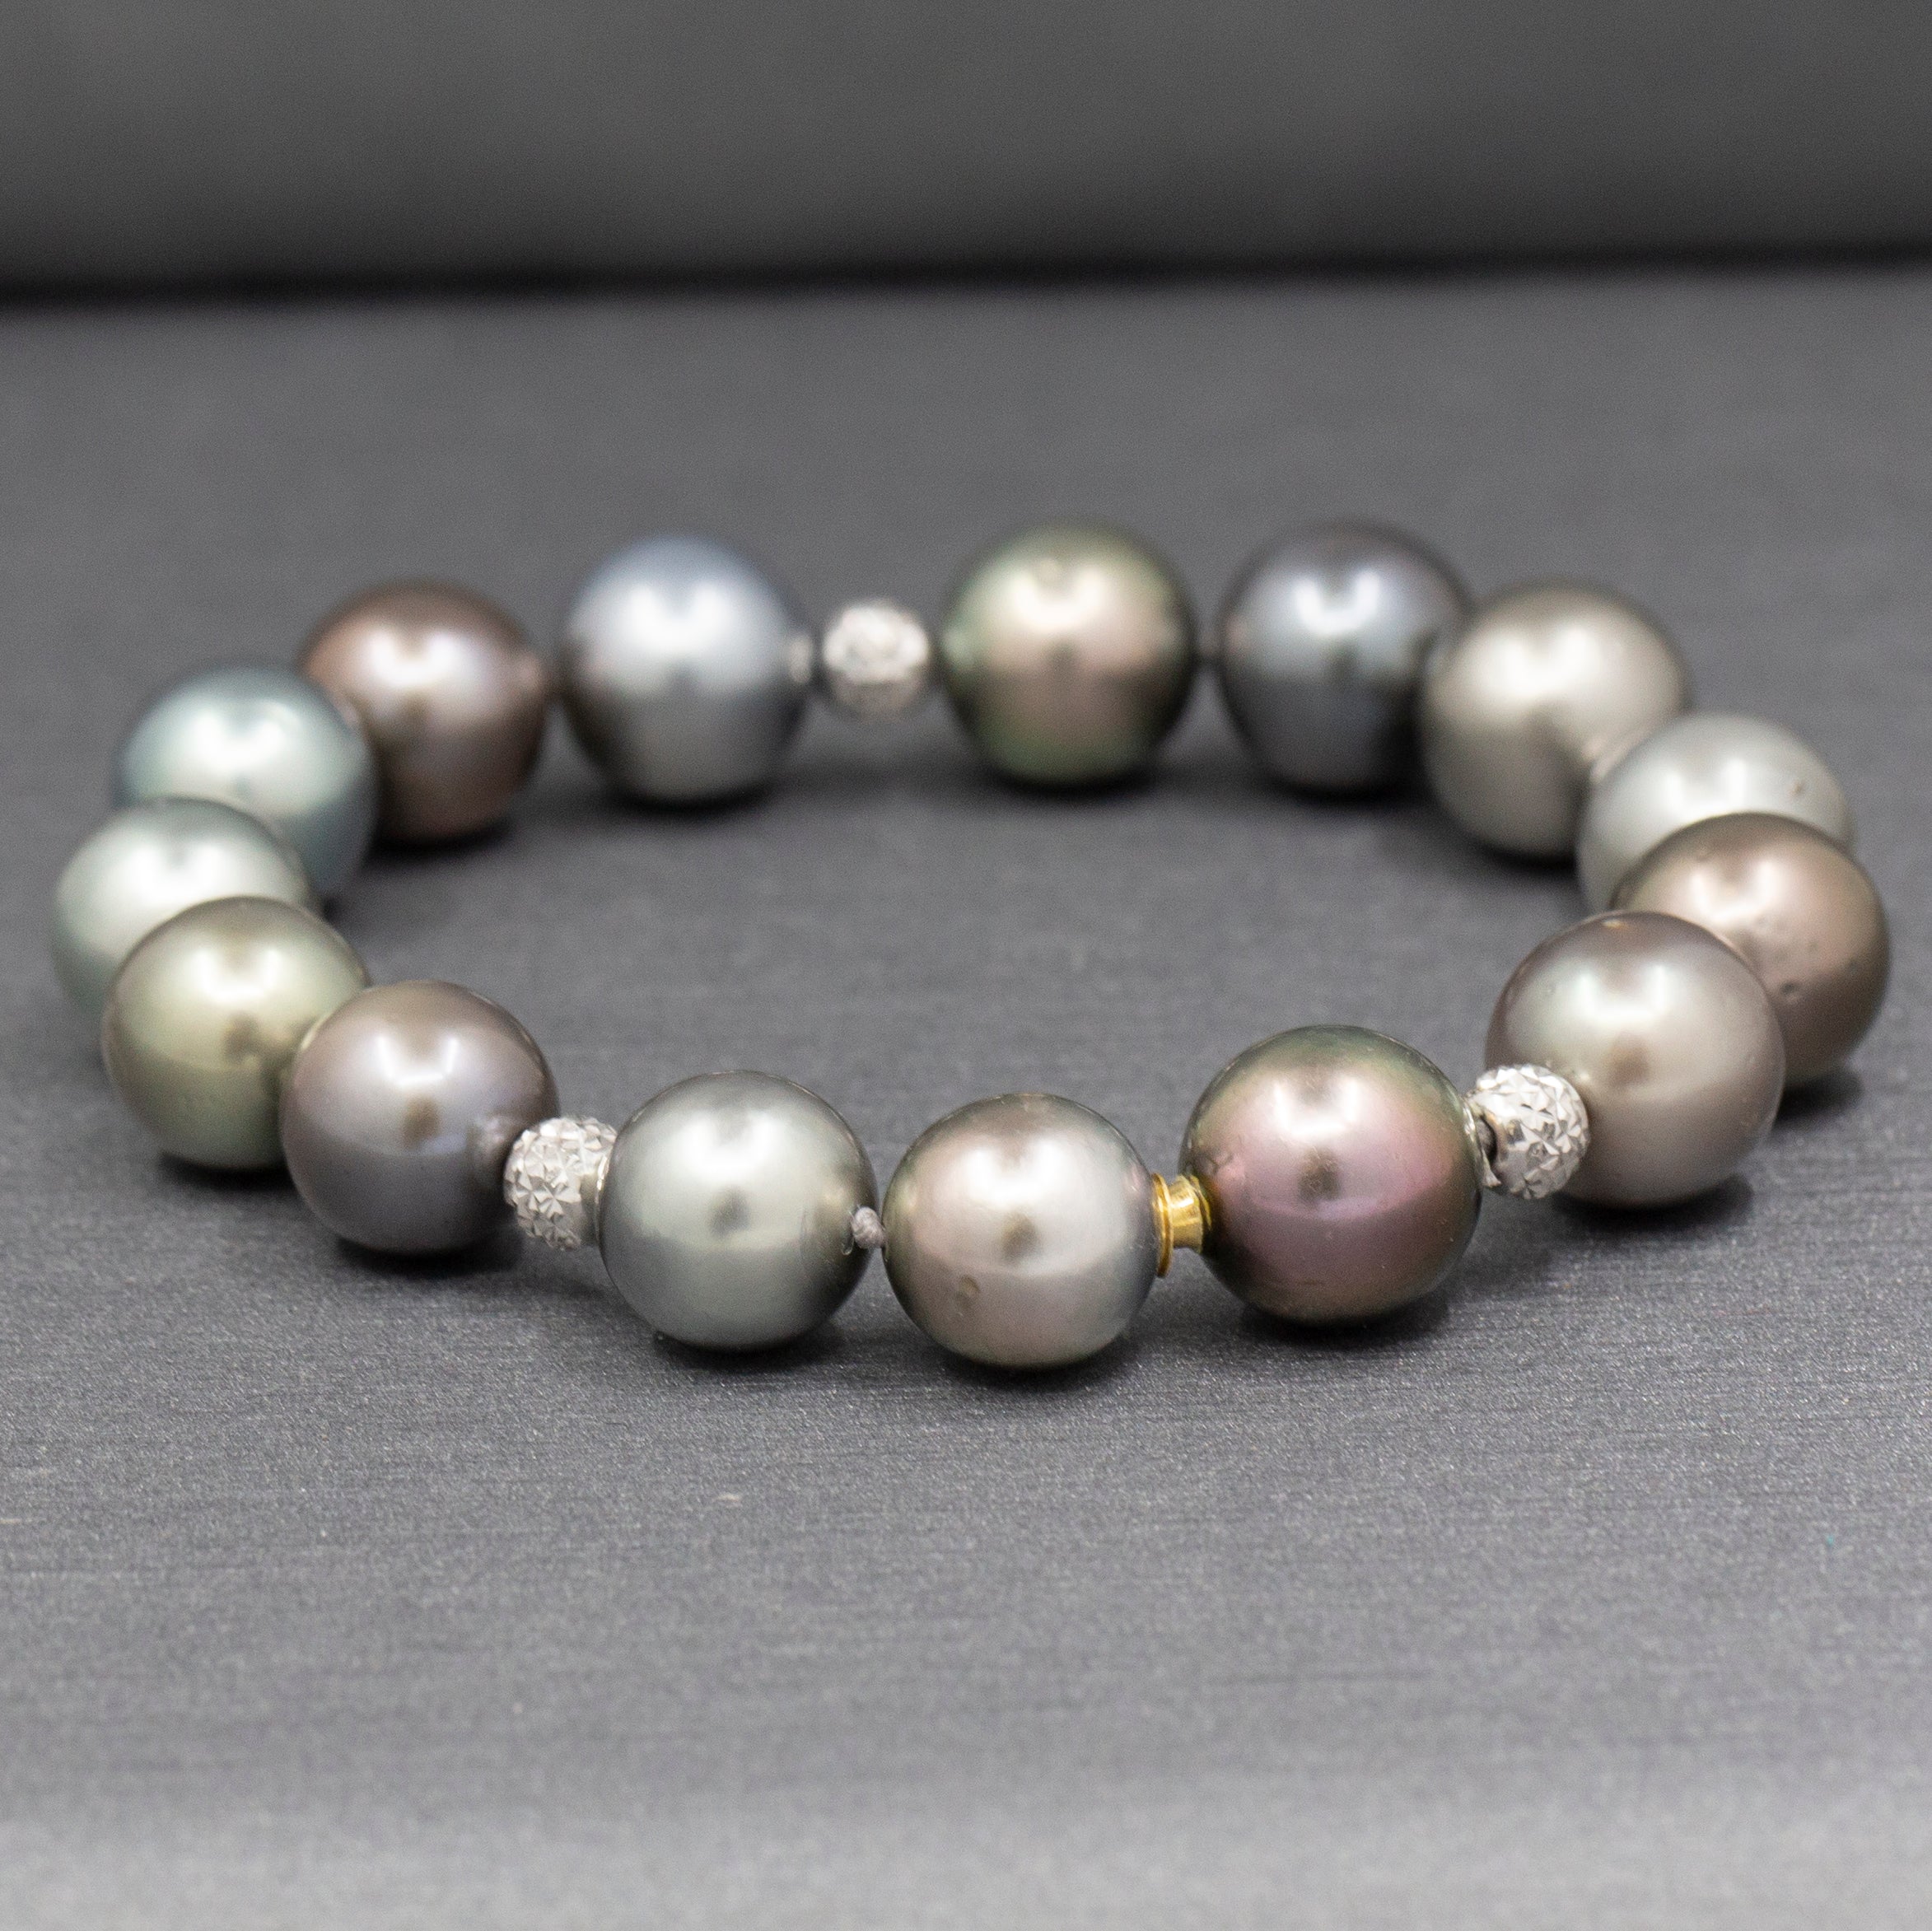 Exquisite Multi Color Tahitian Pearl Bracelet in 18k White and Yellow Gold